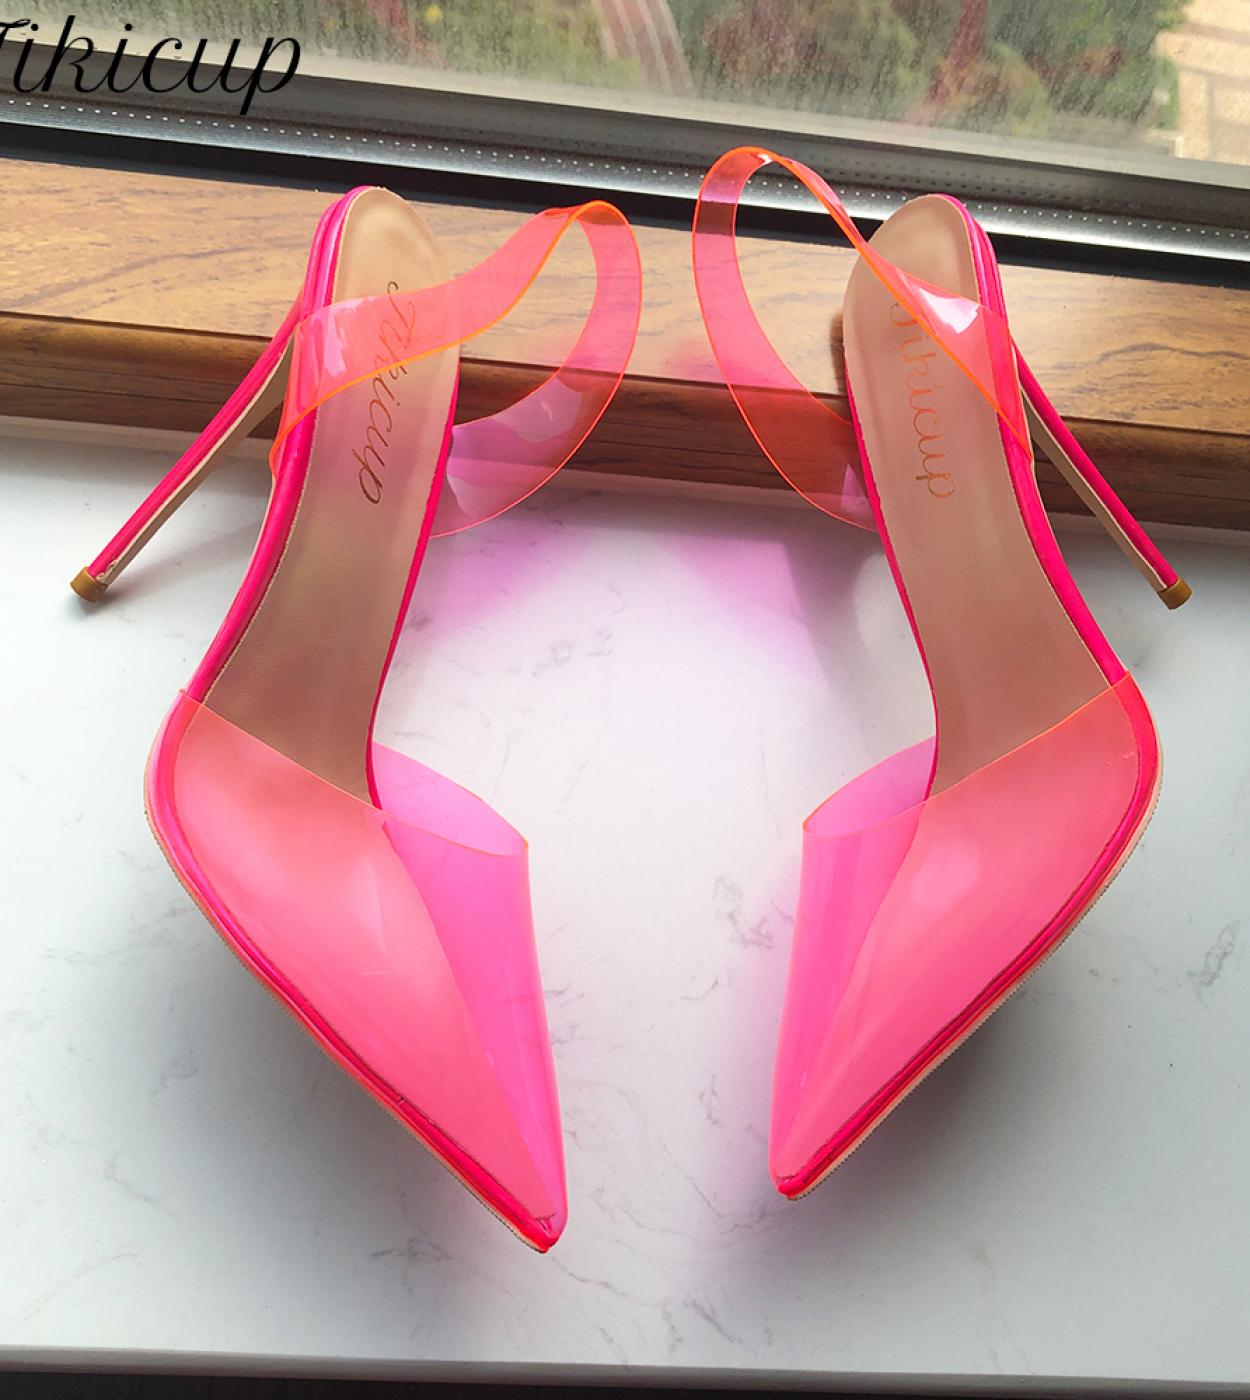 Tikicup Rose Pink Women Transparent Pointy Toe Slingback High Heel Shoes Summer Ladies Jelly Stiletto Pumps Color Custom